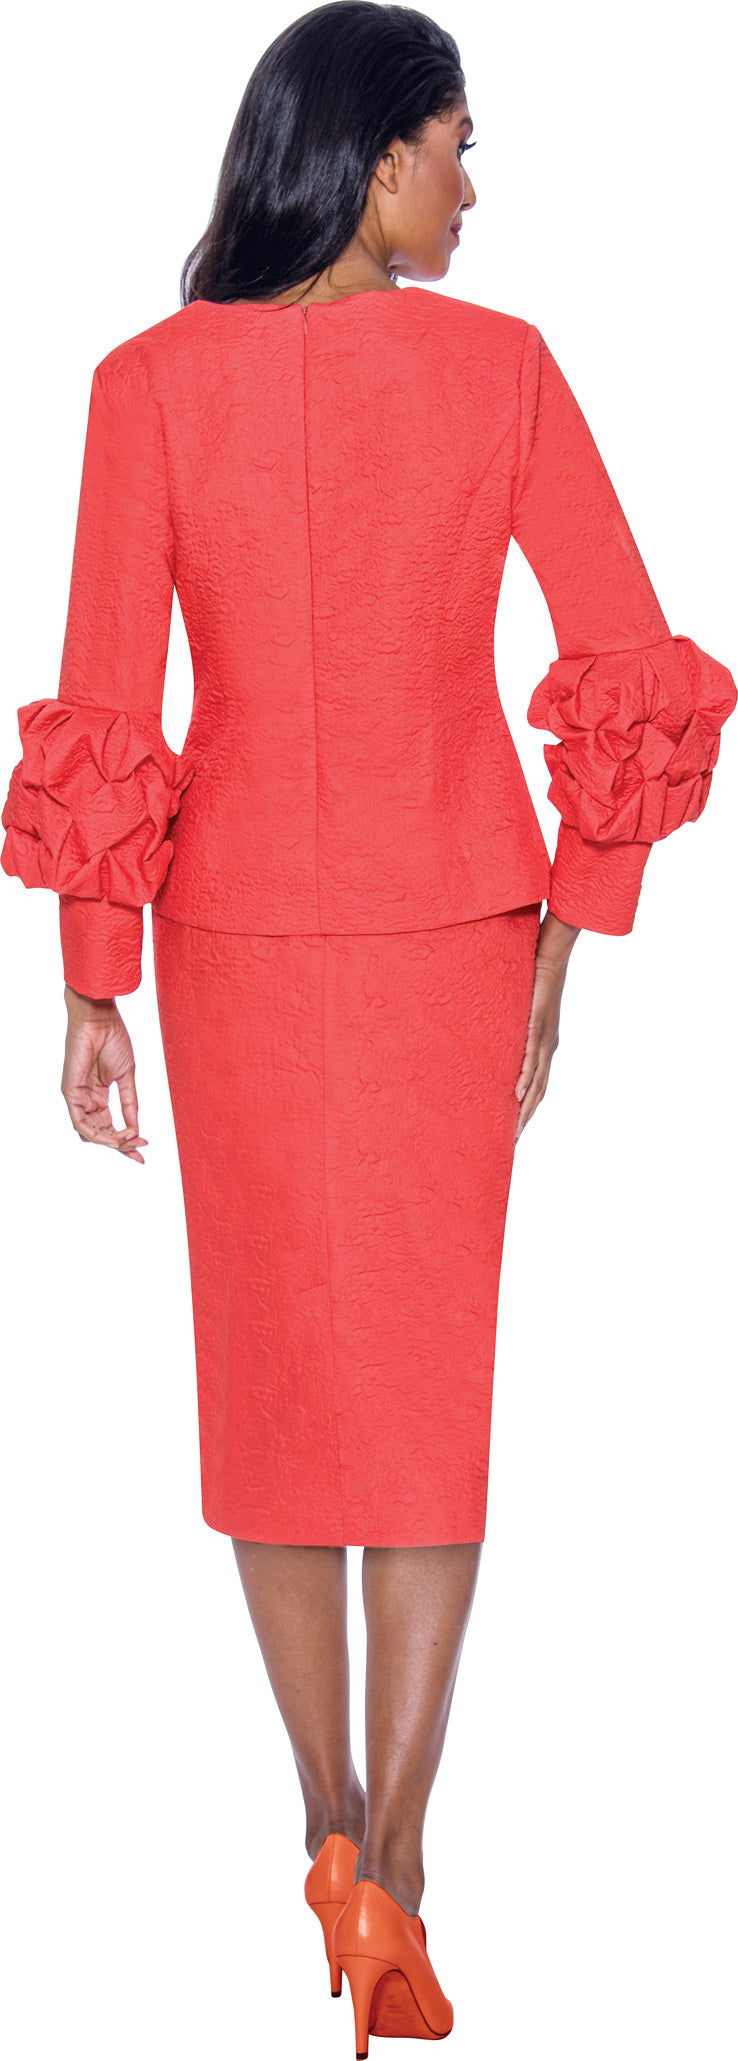 Plus Size Dresses Long Sleeve Mother of the Bride Crinkle Dress Coral